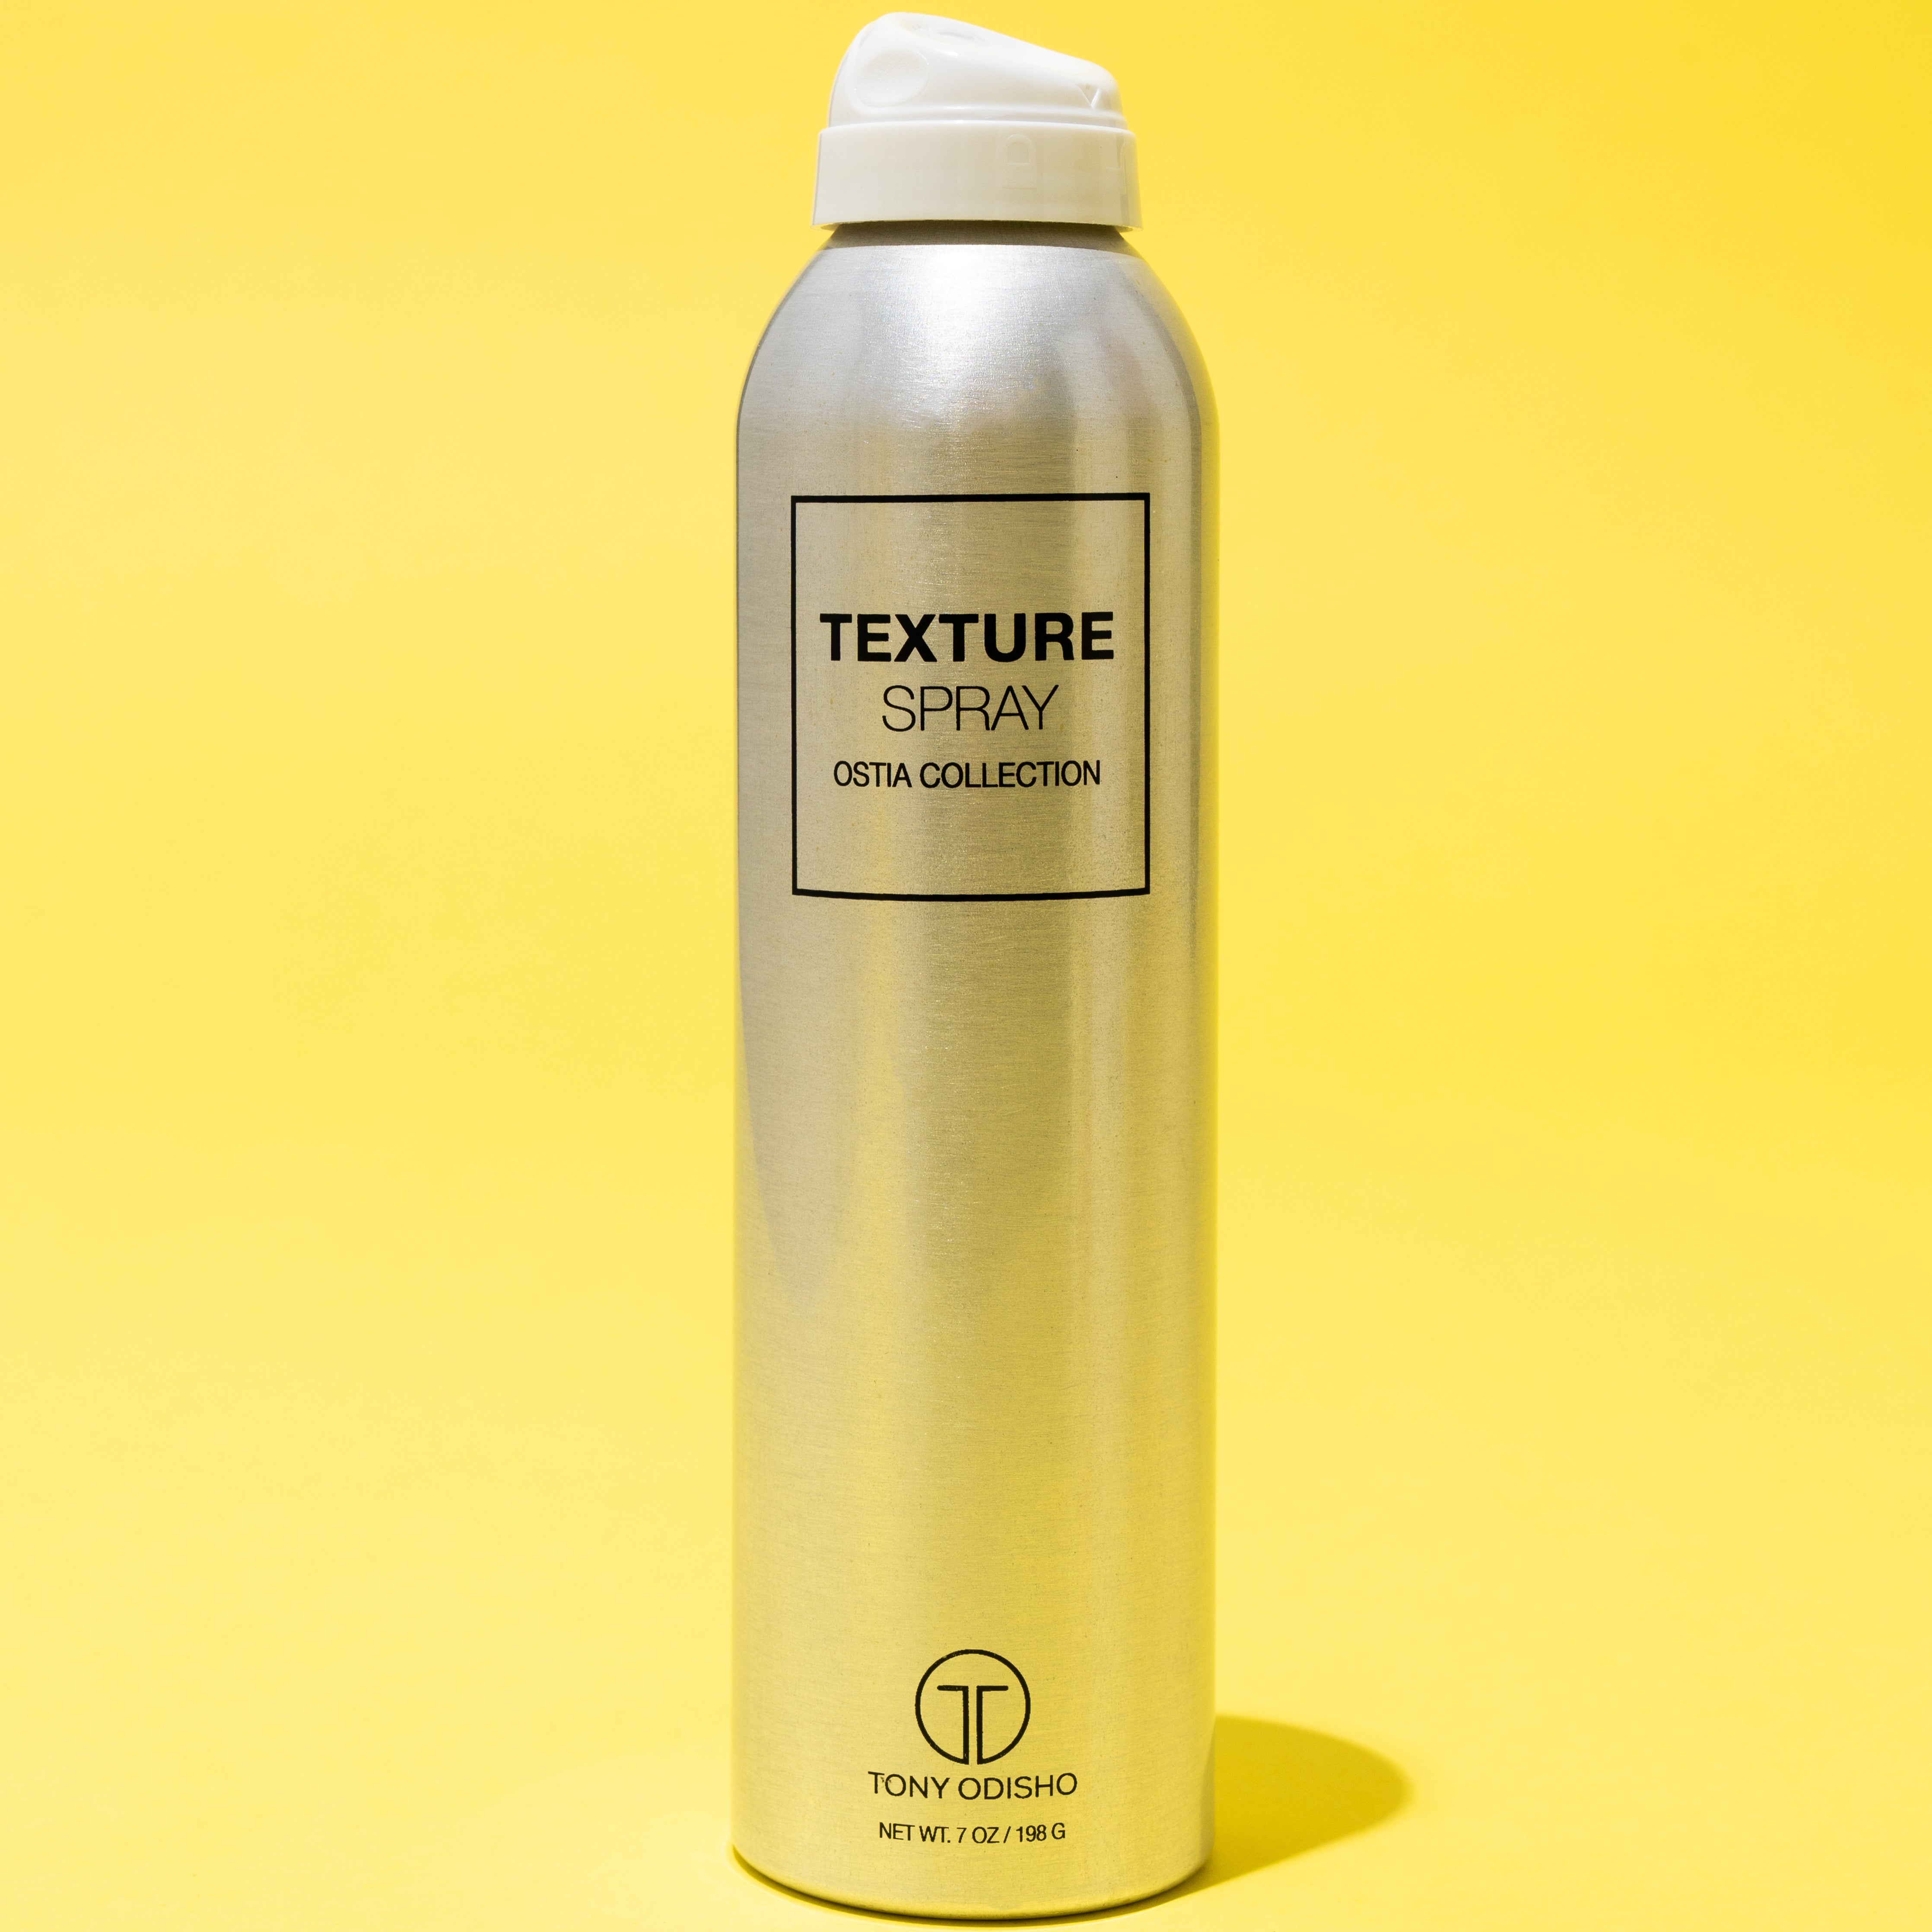 Ostia Collection Texture Spray 7oz | Adds texture to create dimension and absorbs oils for a sleek 'undone' look | Light-hold Spray